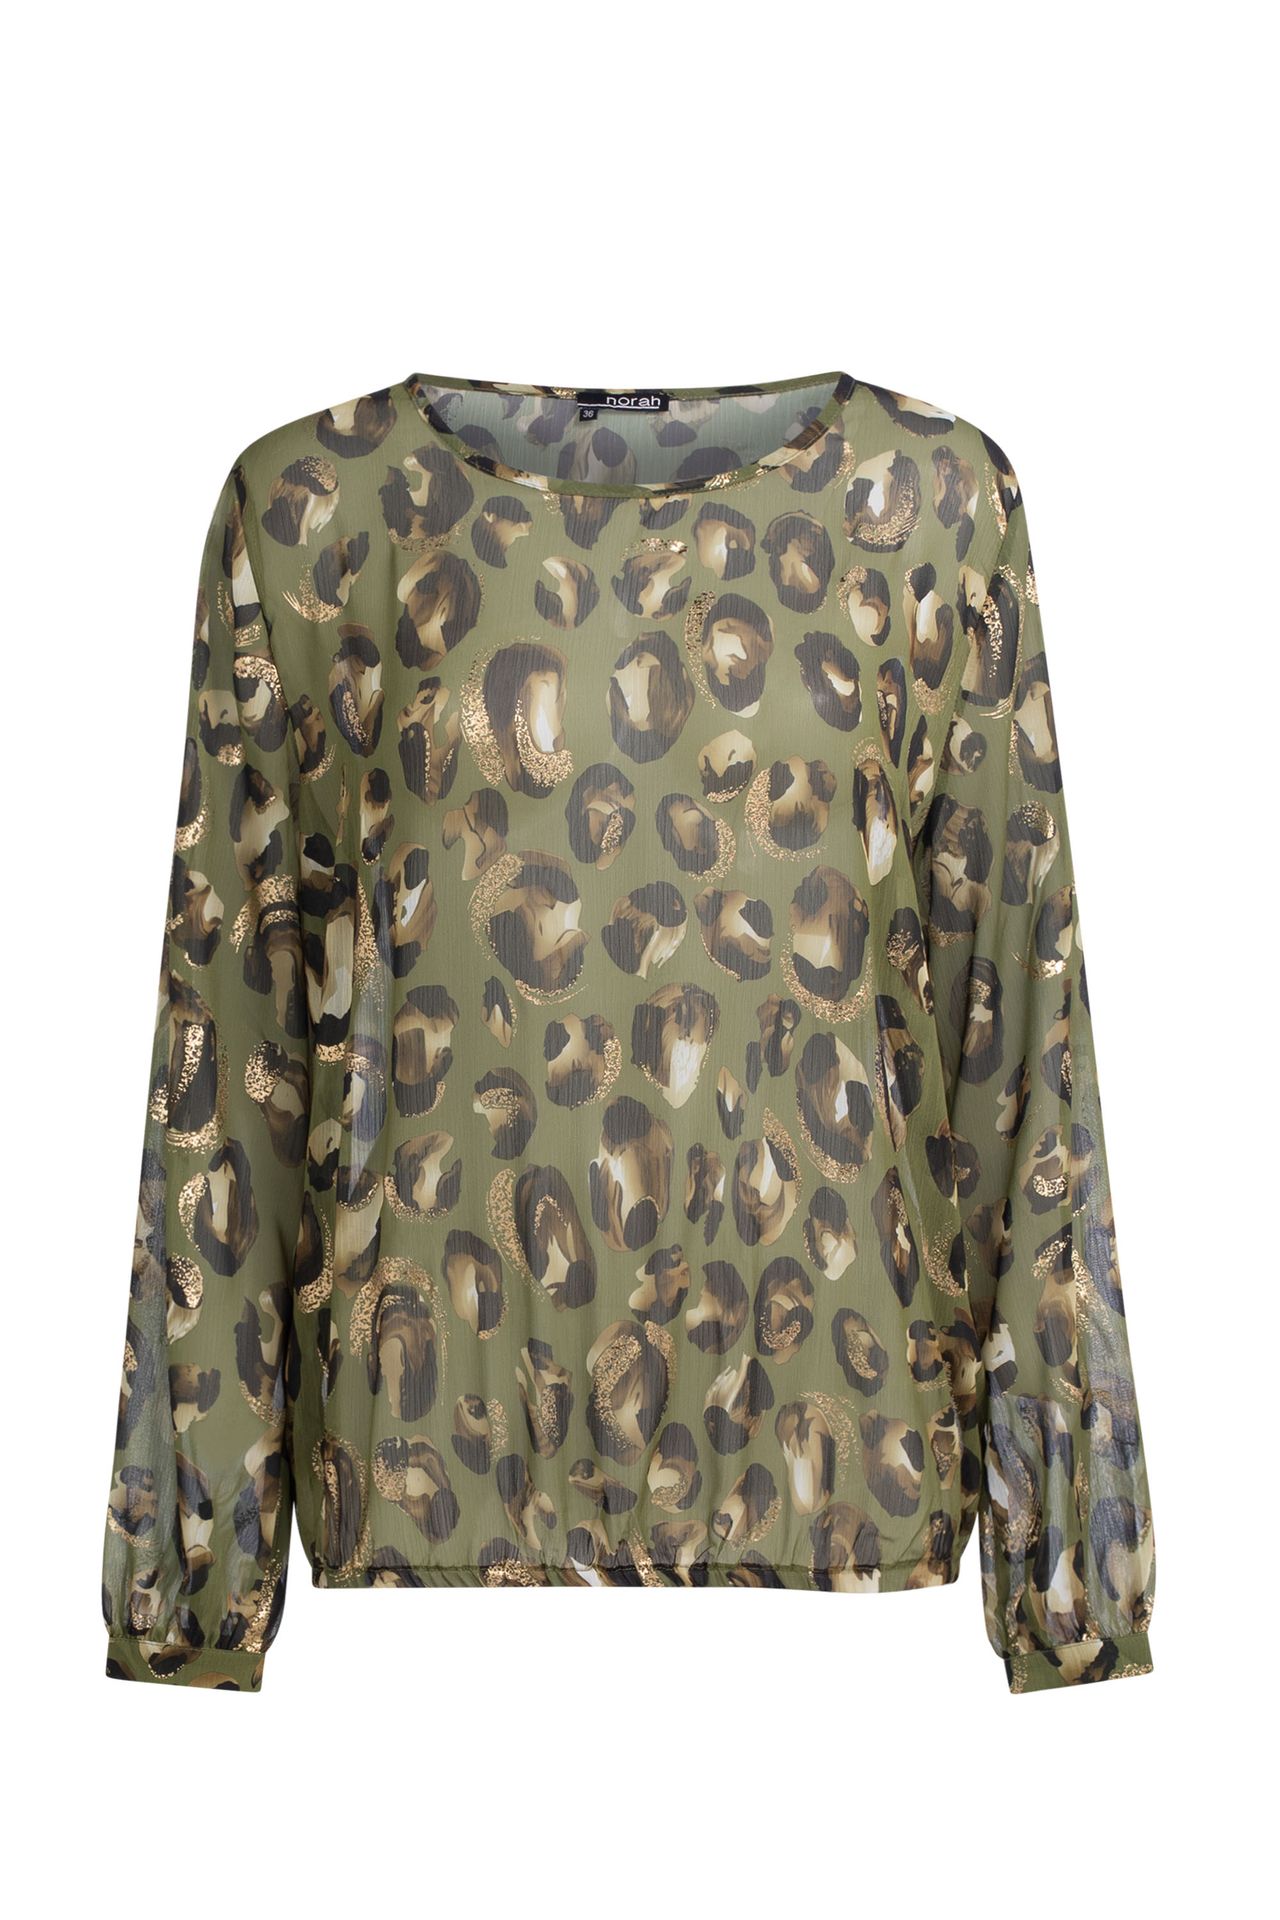 Norah Blouse - Feest collectie olive green multicolor 211740-592